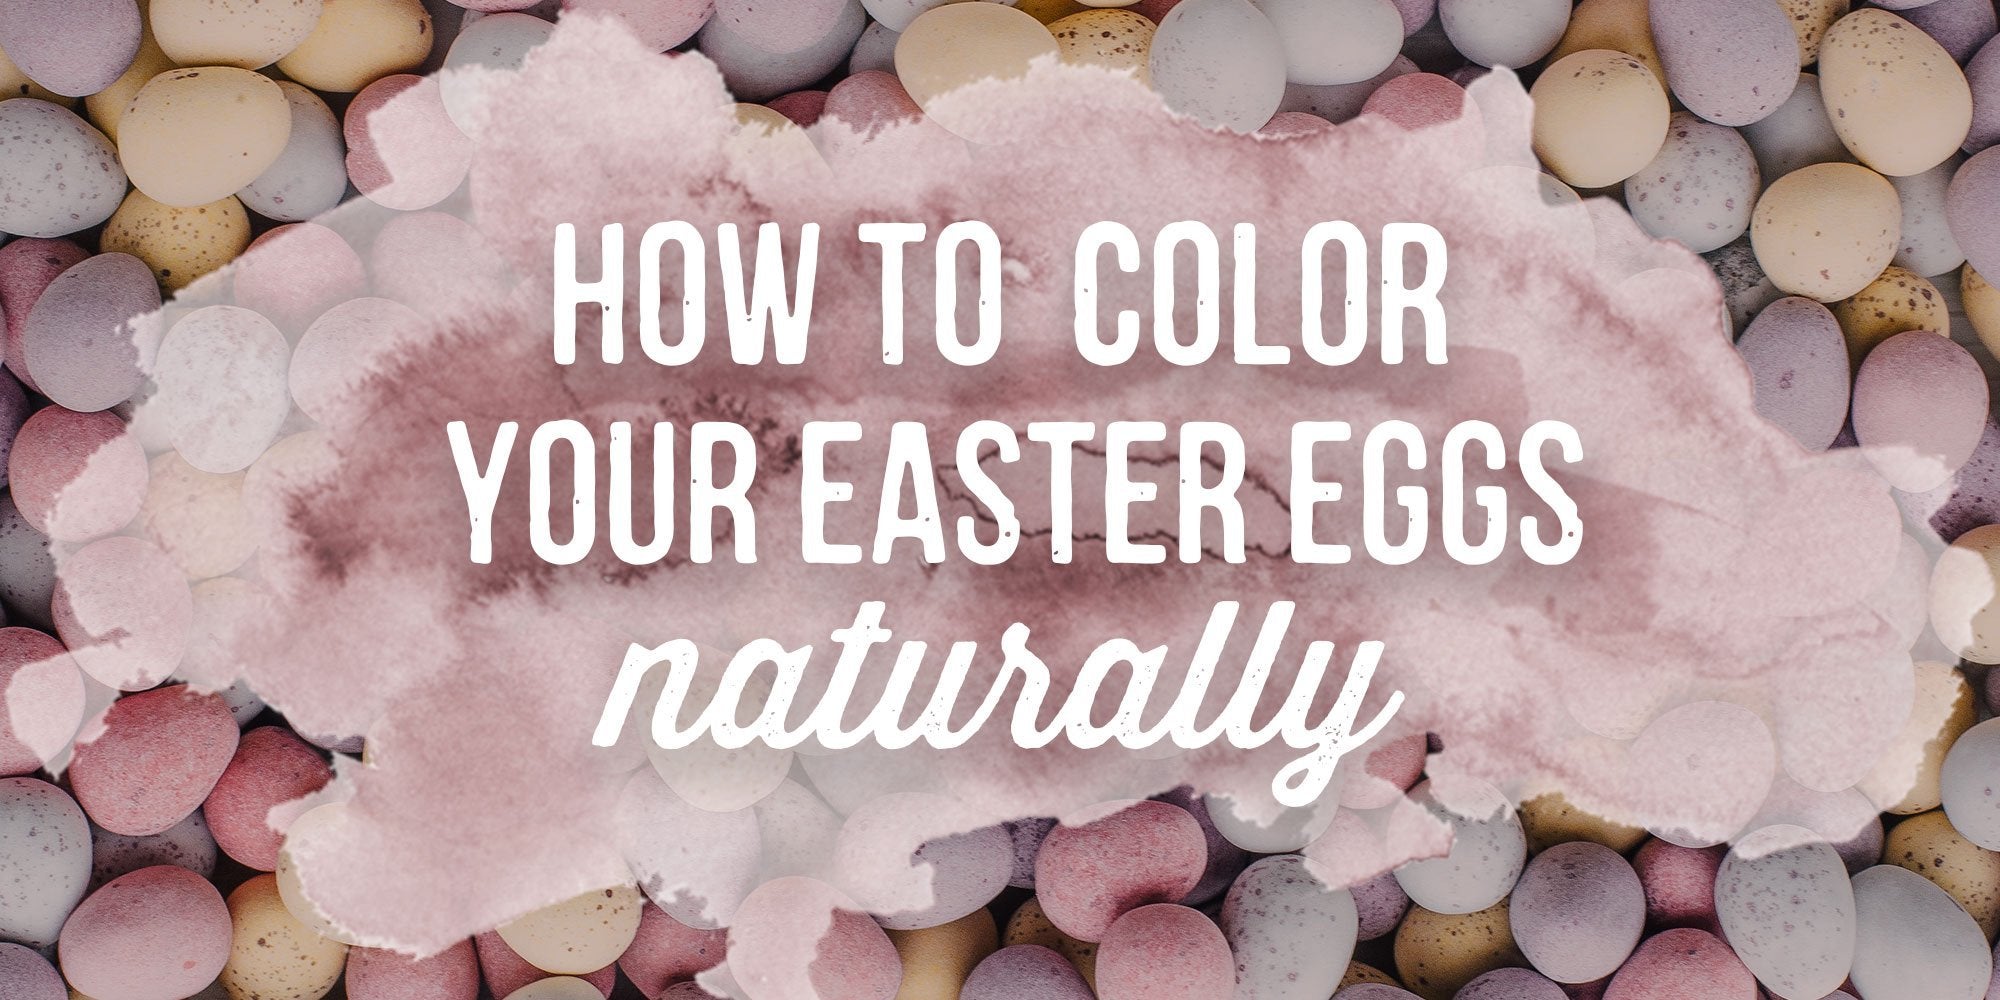 How to Color Easter Eggs Naturally | The Dirt - Super Natural Personal Care